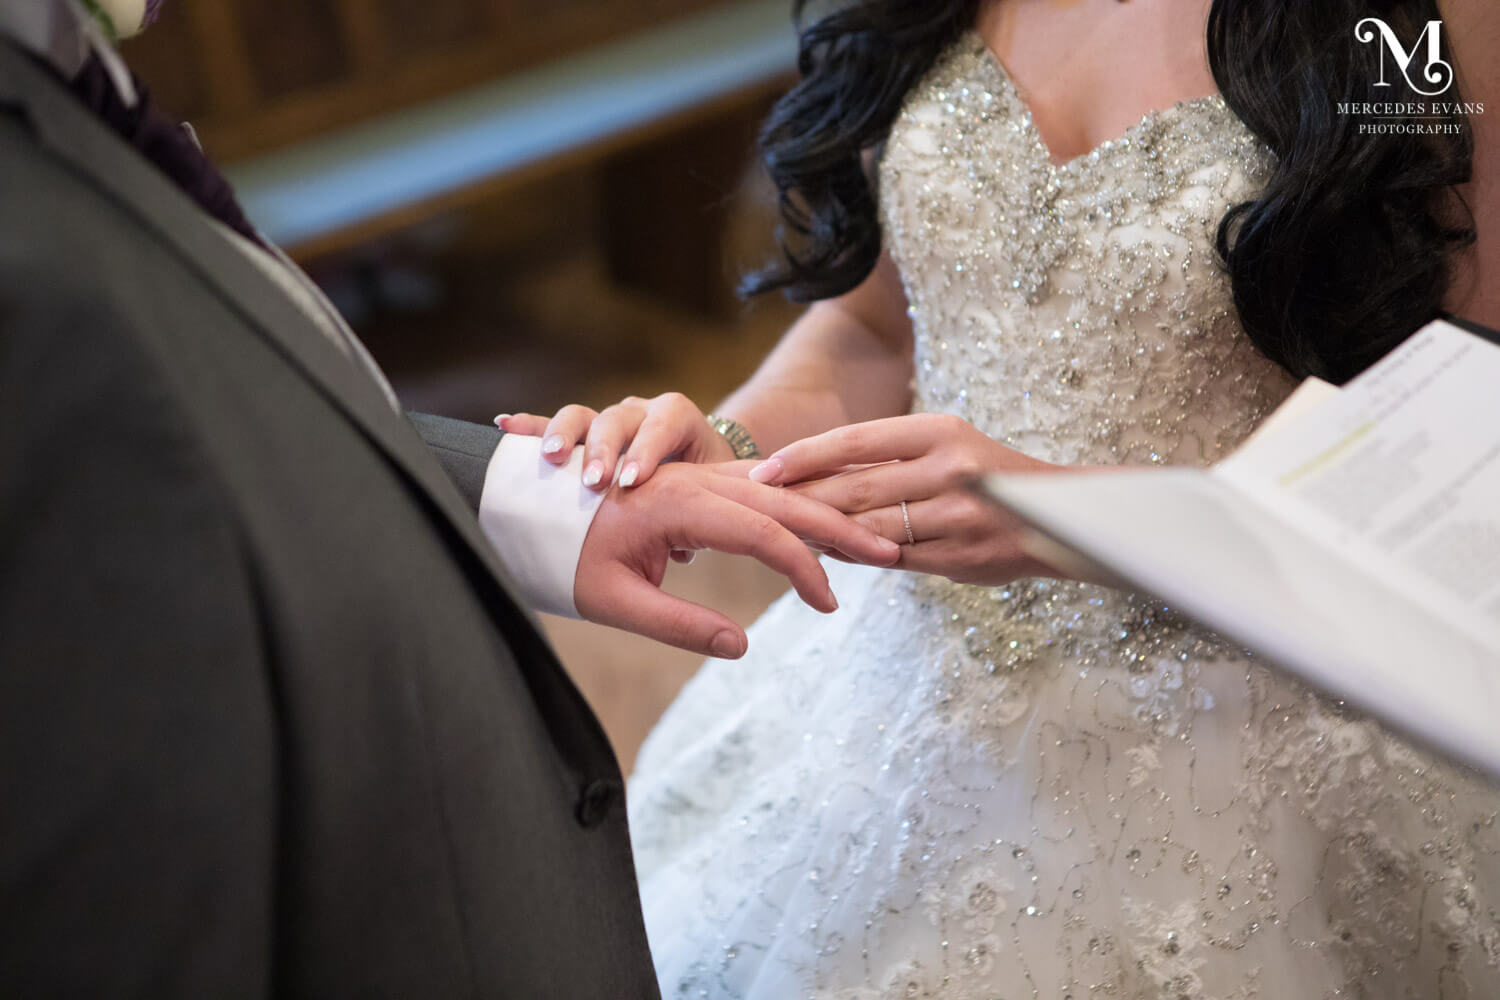 The bride puts a wedding on to the groom's finger during the wedding ceremony